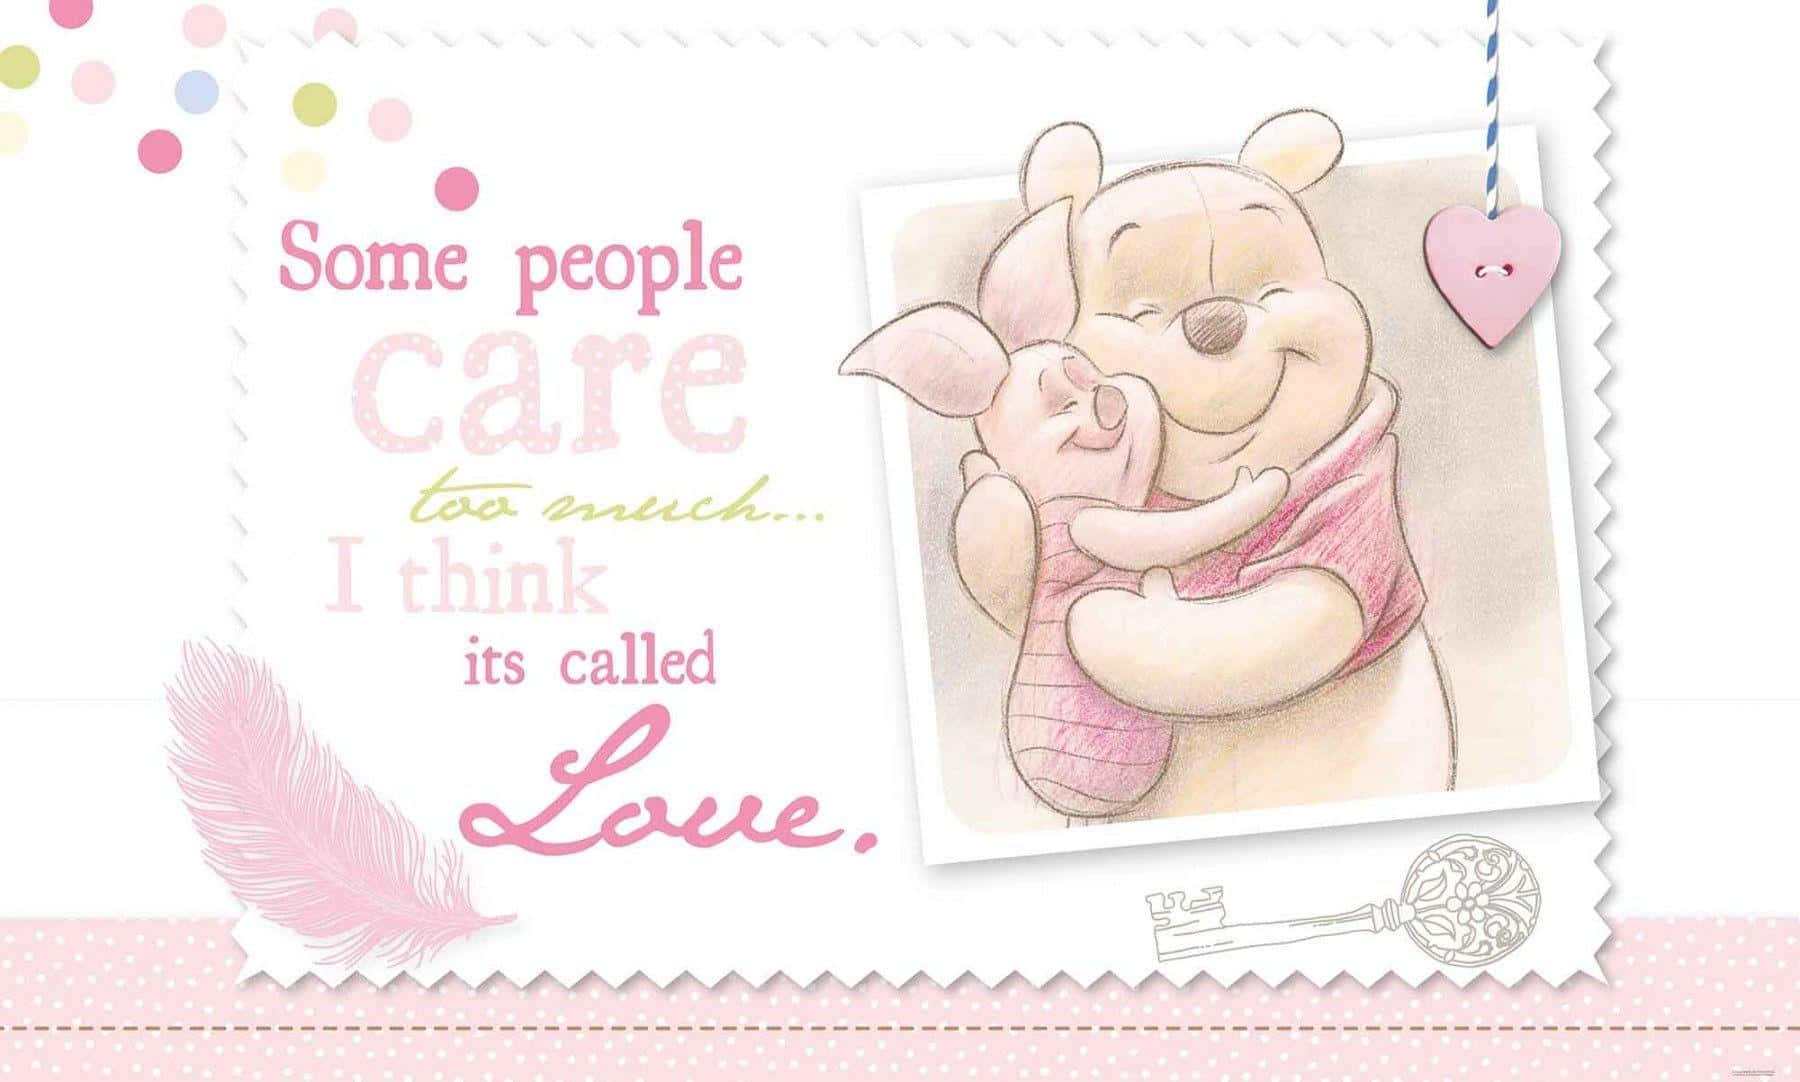 Piglet says friendship is more important than ever! Wallpaper